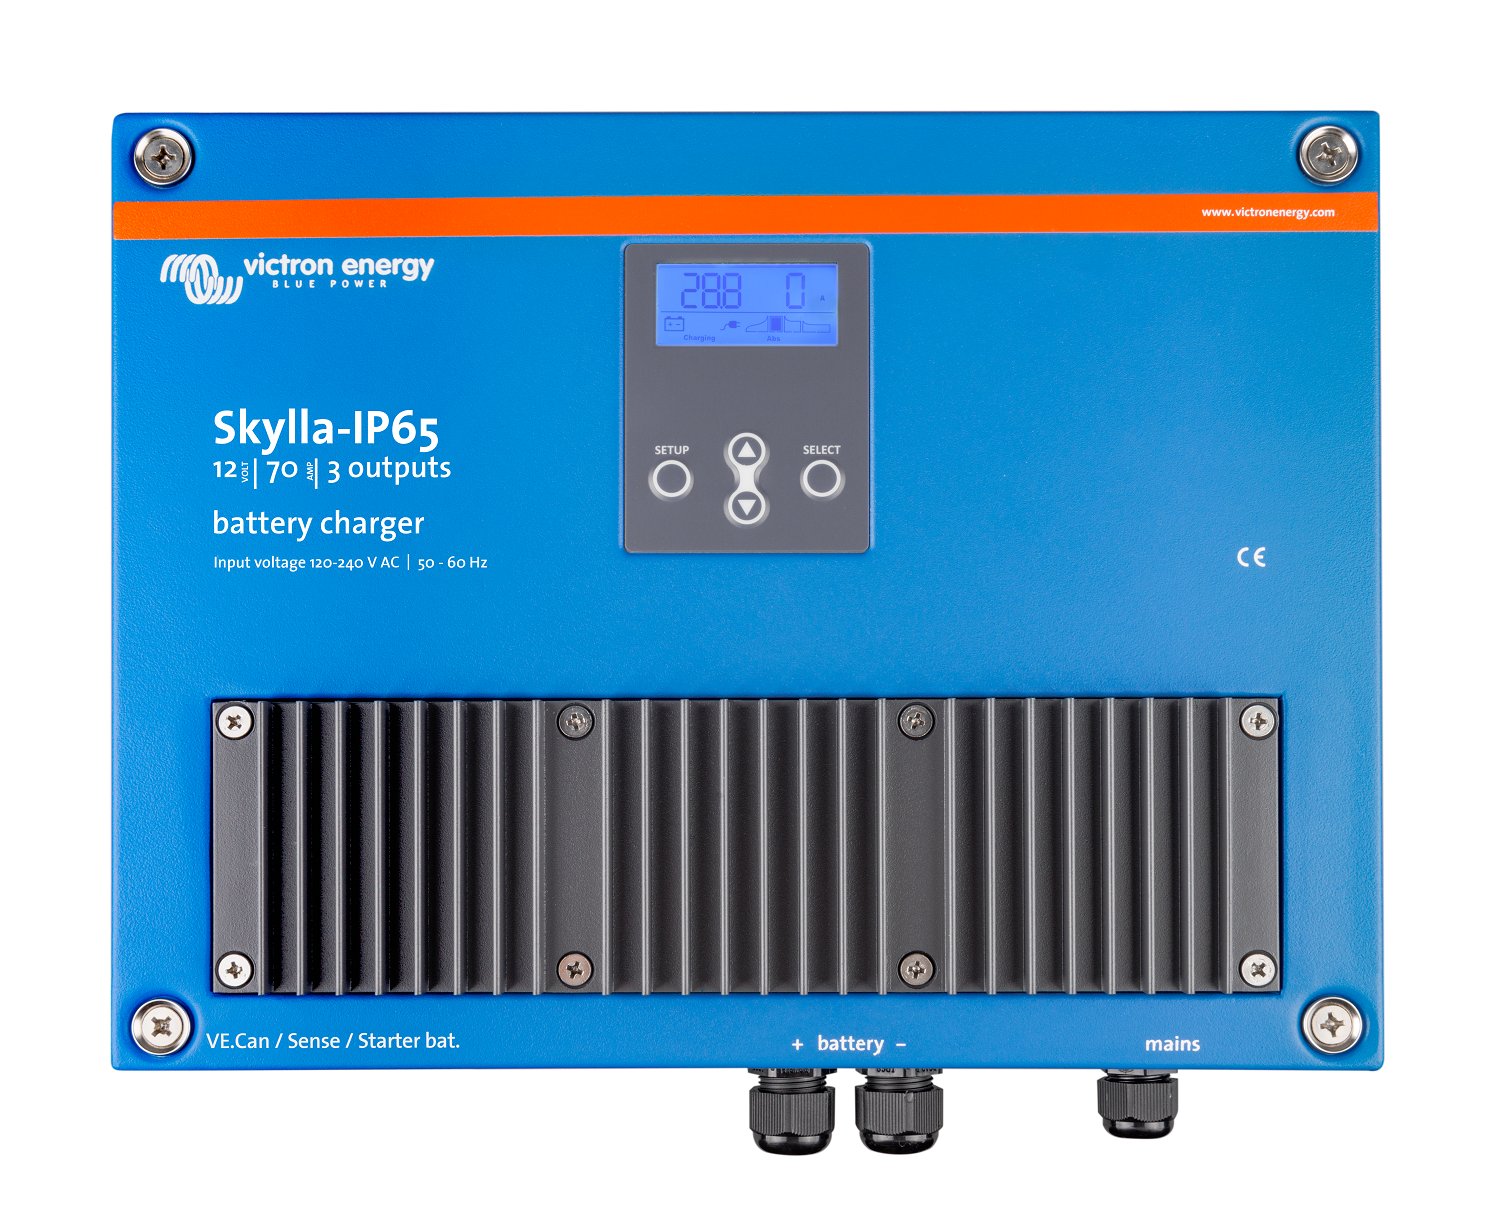 Does the Victron Skylla-IP65 charger support separate profiles for lithium and AGM banks?